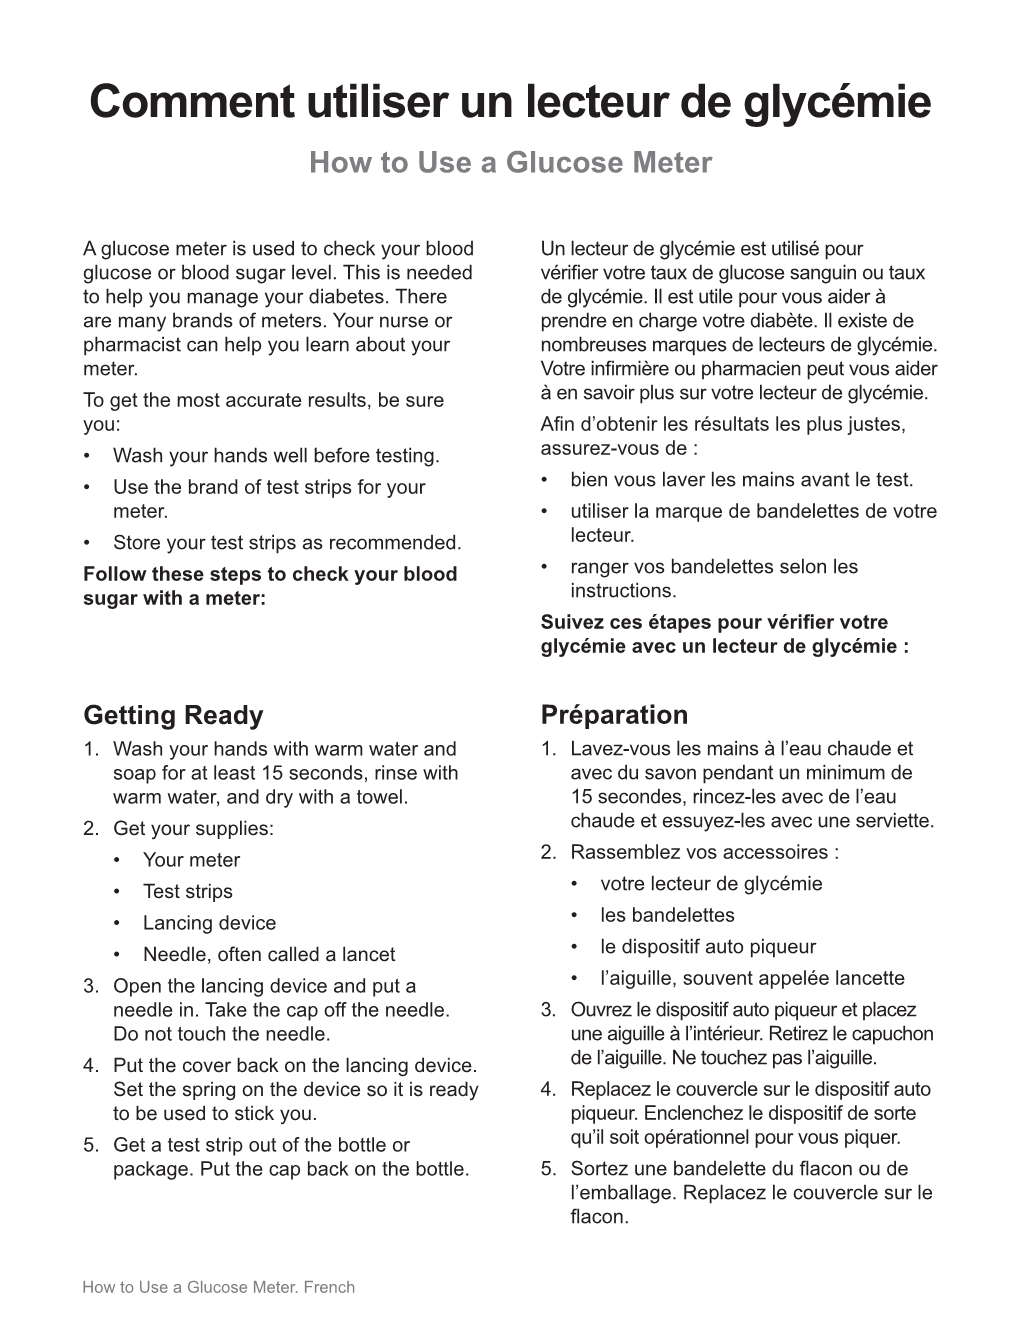 How to Use a Glucose Meter